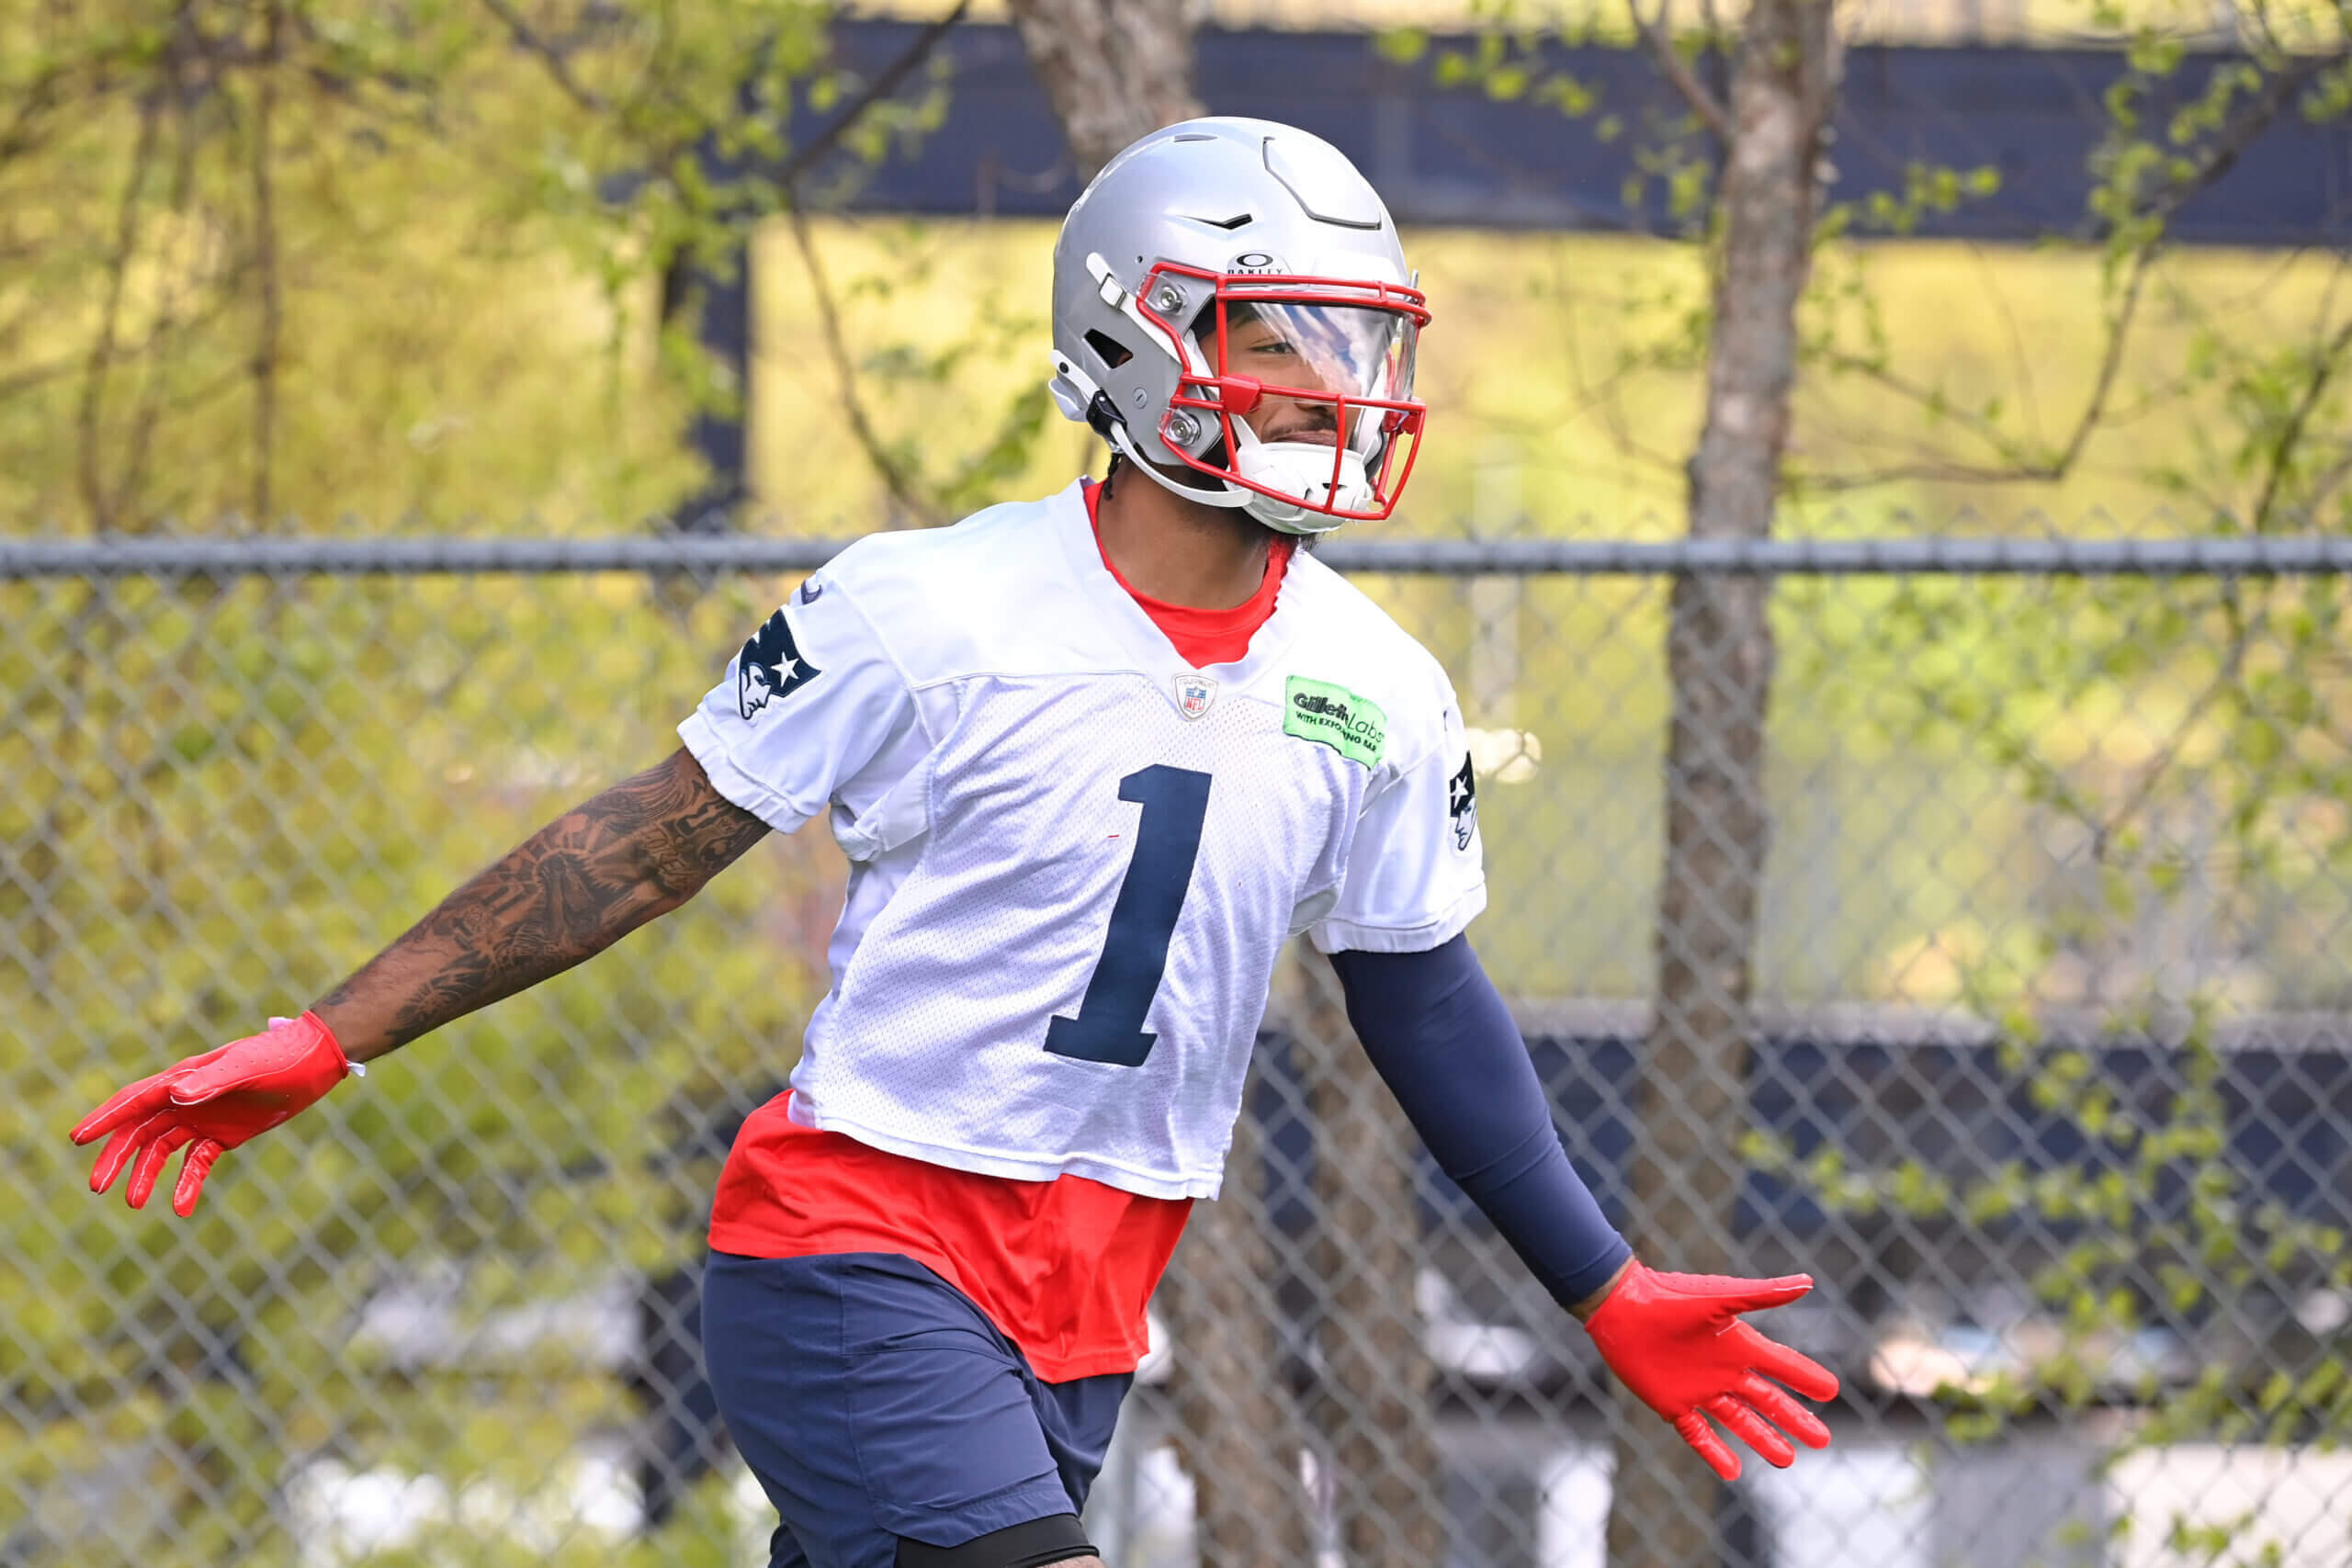 Has the Patriots' wide receiver group improved since last year's debacle?